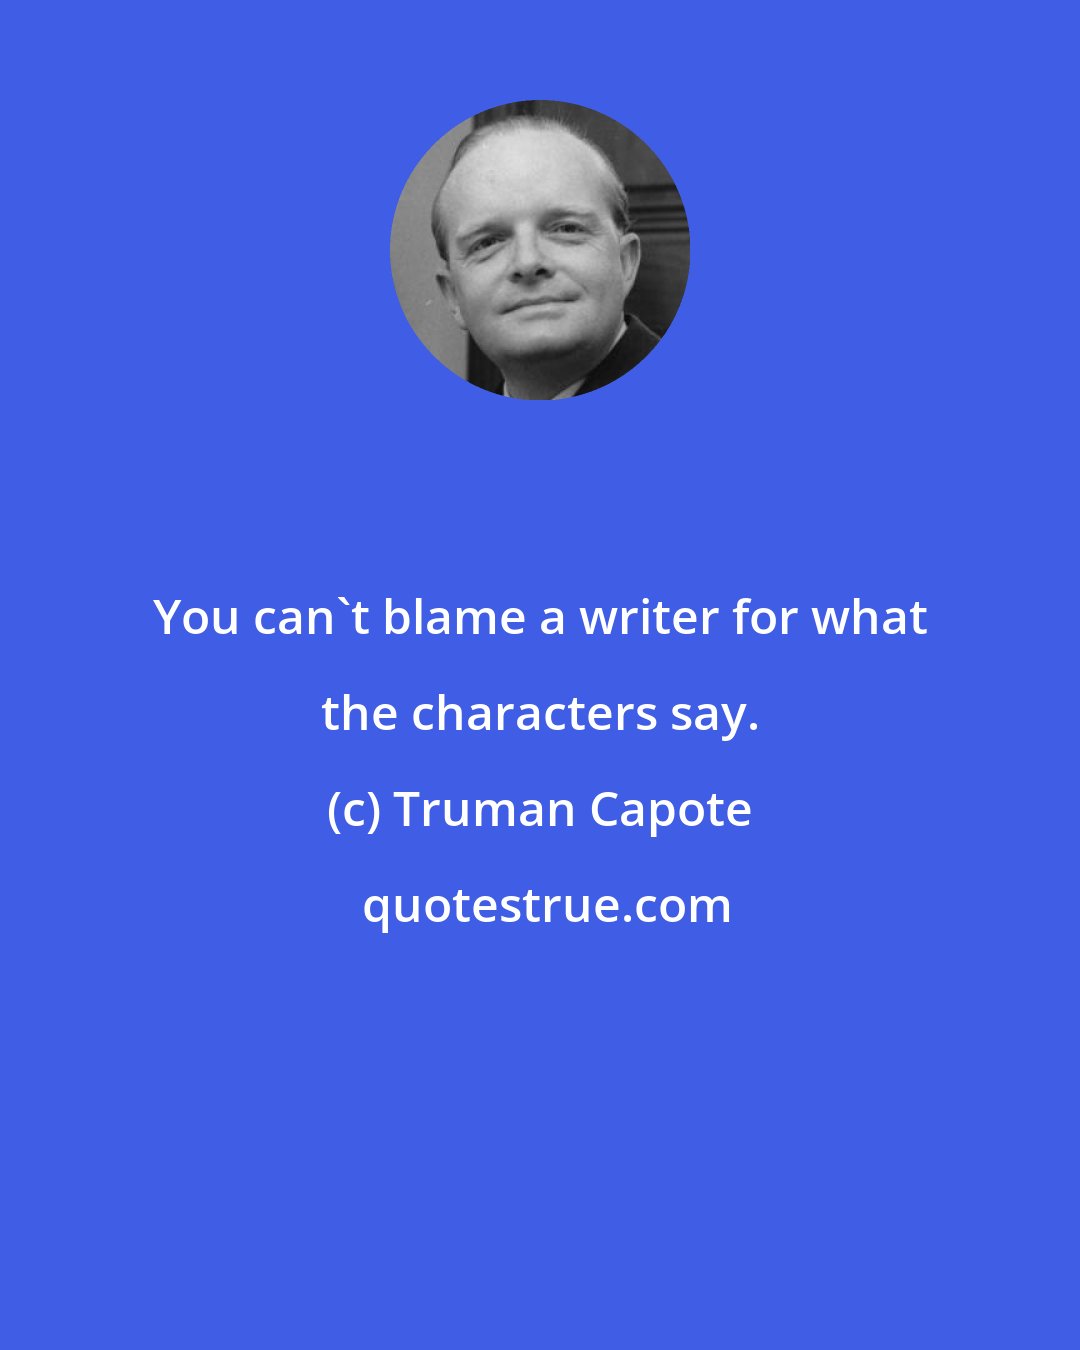 Truman Capote: You can't blame a writer for what the characters say.